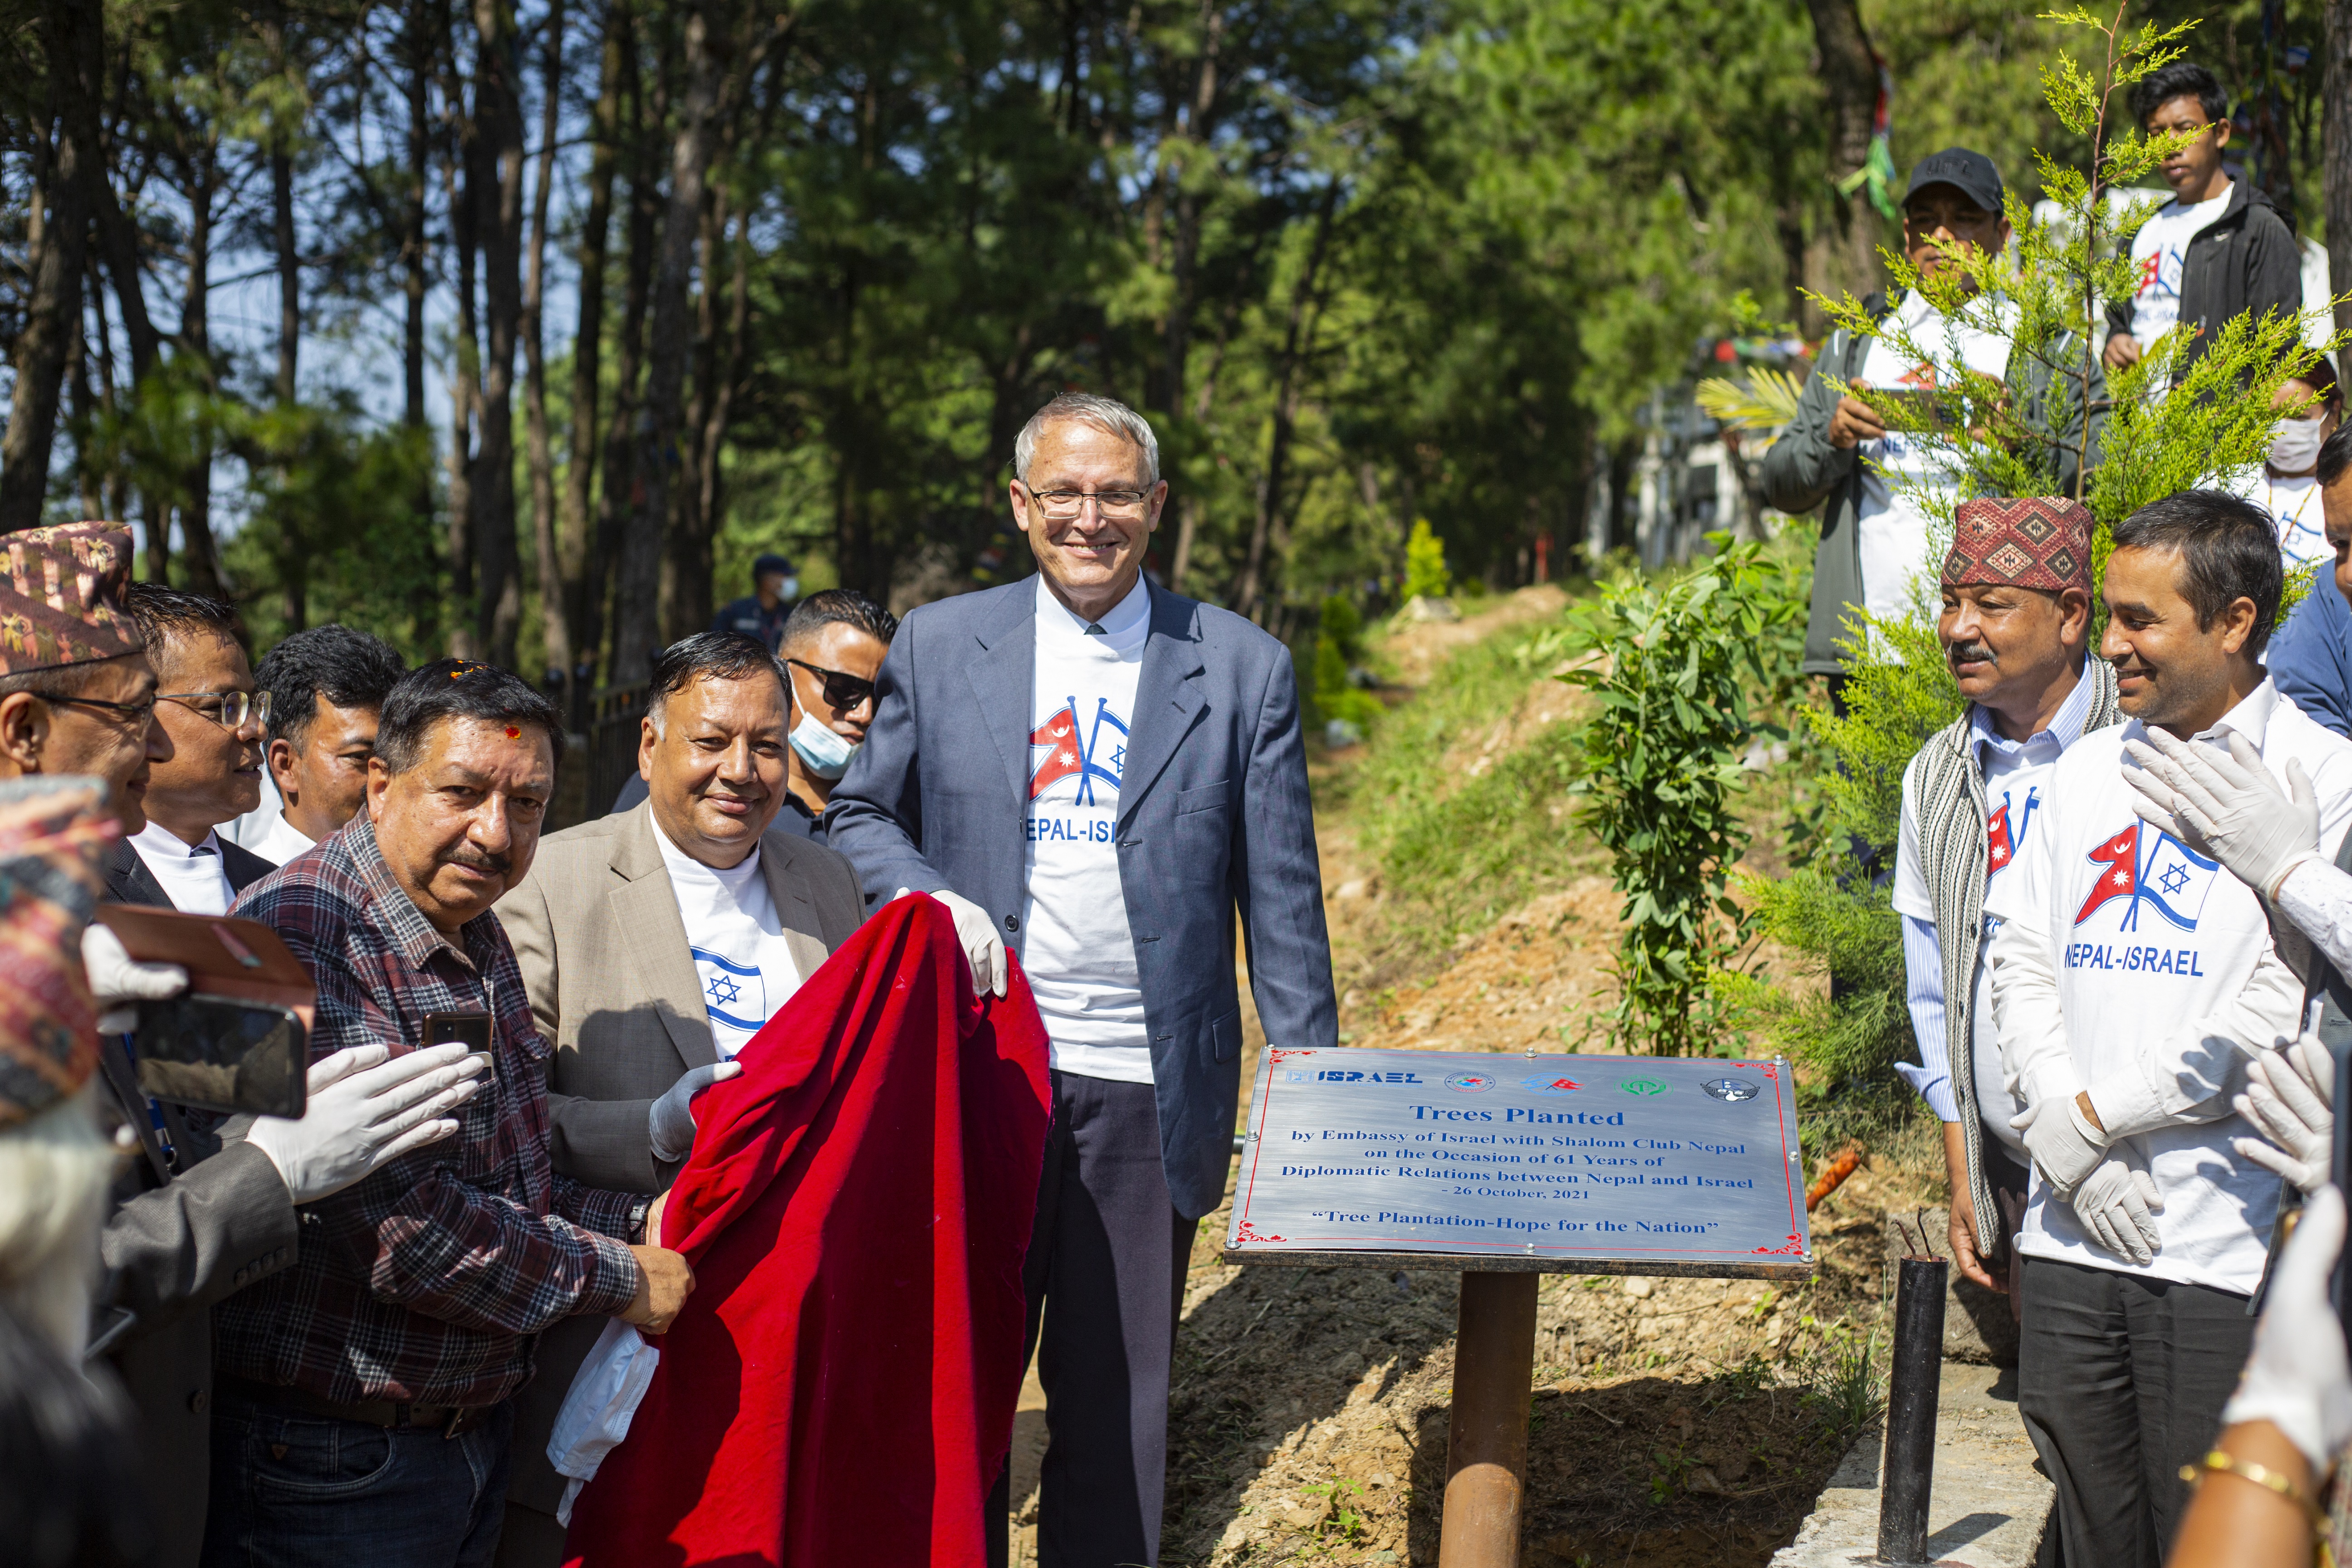 tree-plantation-held-to-celebrate-61-years-of-nepal-israel-relations